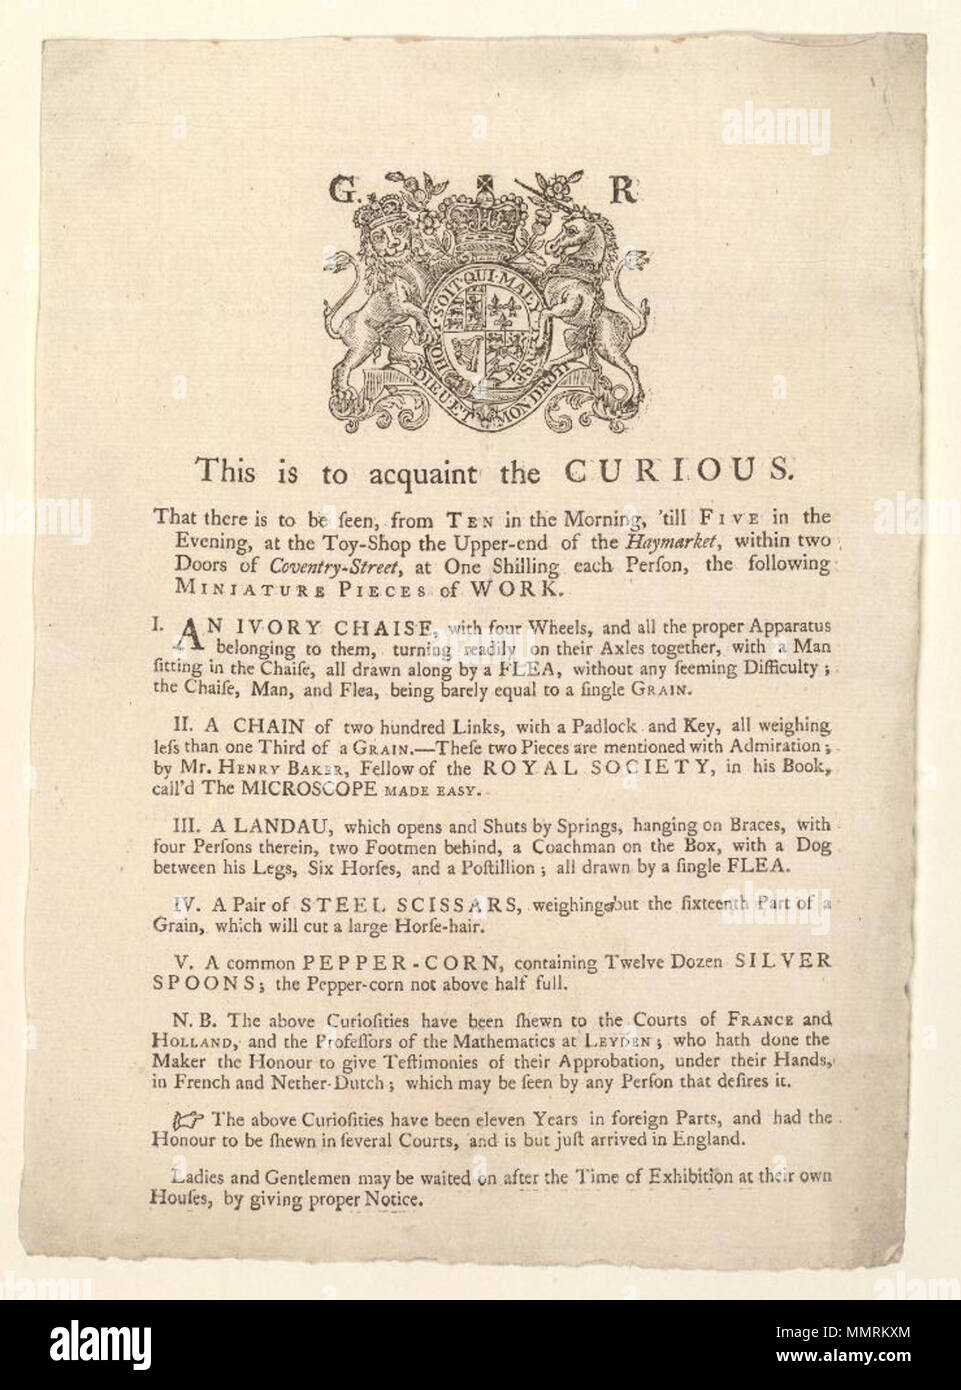 . Advertisement of Toy shop, [1750?], announcing Miniature pieces of work; 'Ladies and gentlemen may be waited on after the time of exhibition at their own houses, by giving proper notice'; Miniature pieces of work; Ivory chaise; Chain of two hundred links; Landau; Pair of steel scissars, weighing but the sixteenth part of a grain; Common pepper-corn, containing twelve dozen silver spoons; This is to acquaint the curious. That there is to be seen, from ten in the morning, 'till five in the evening, at the toy-shop the upper-end of Haymarket, within two doors of Coventry Street... the following Stock Photo